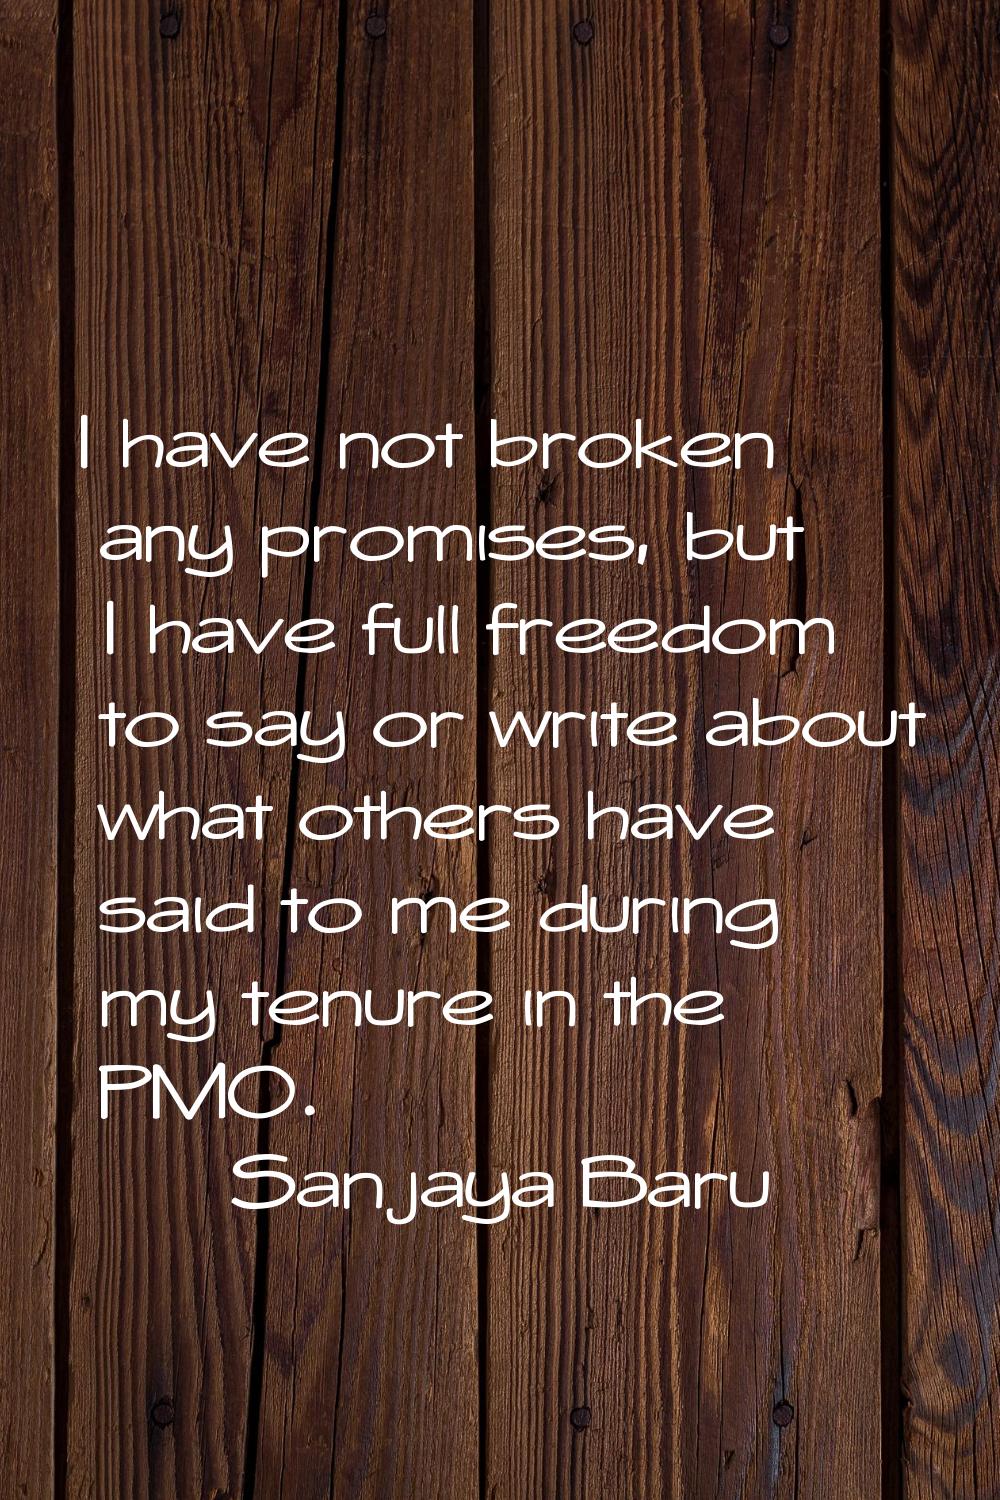 I have not broken any promises, but I have full freedom to say or write about what others have said